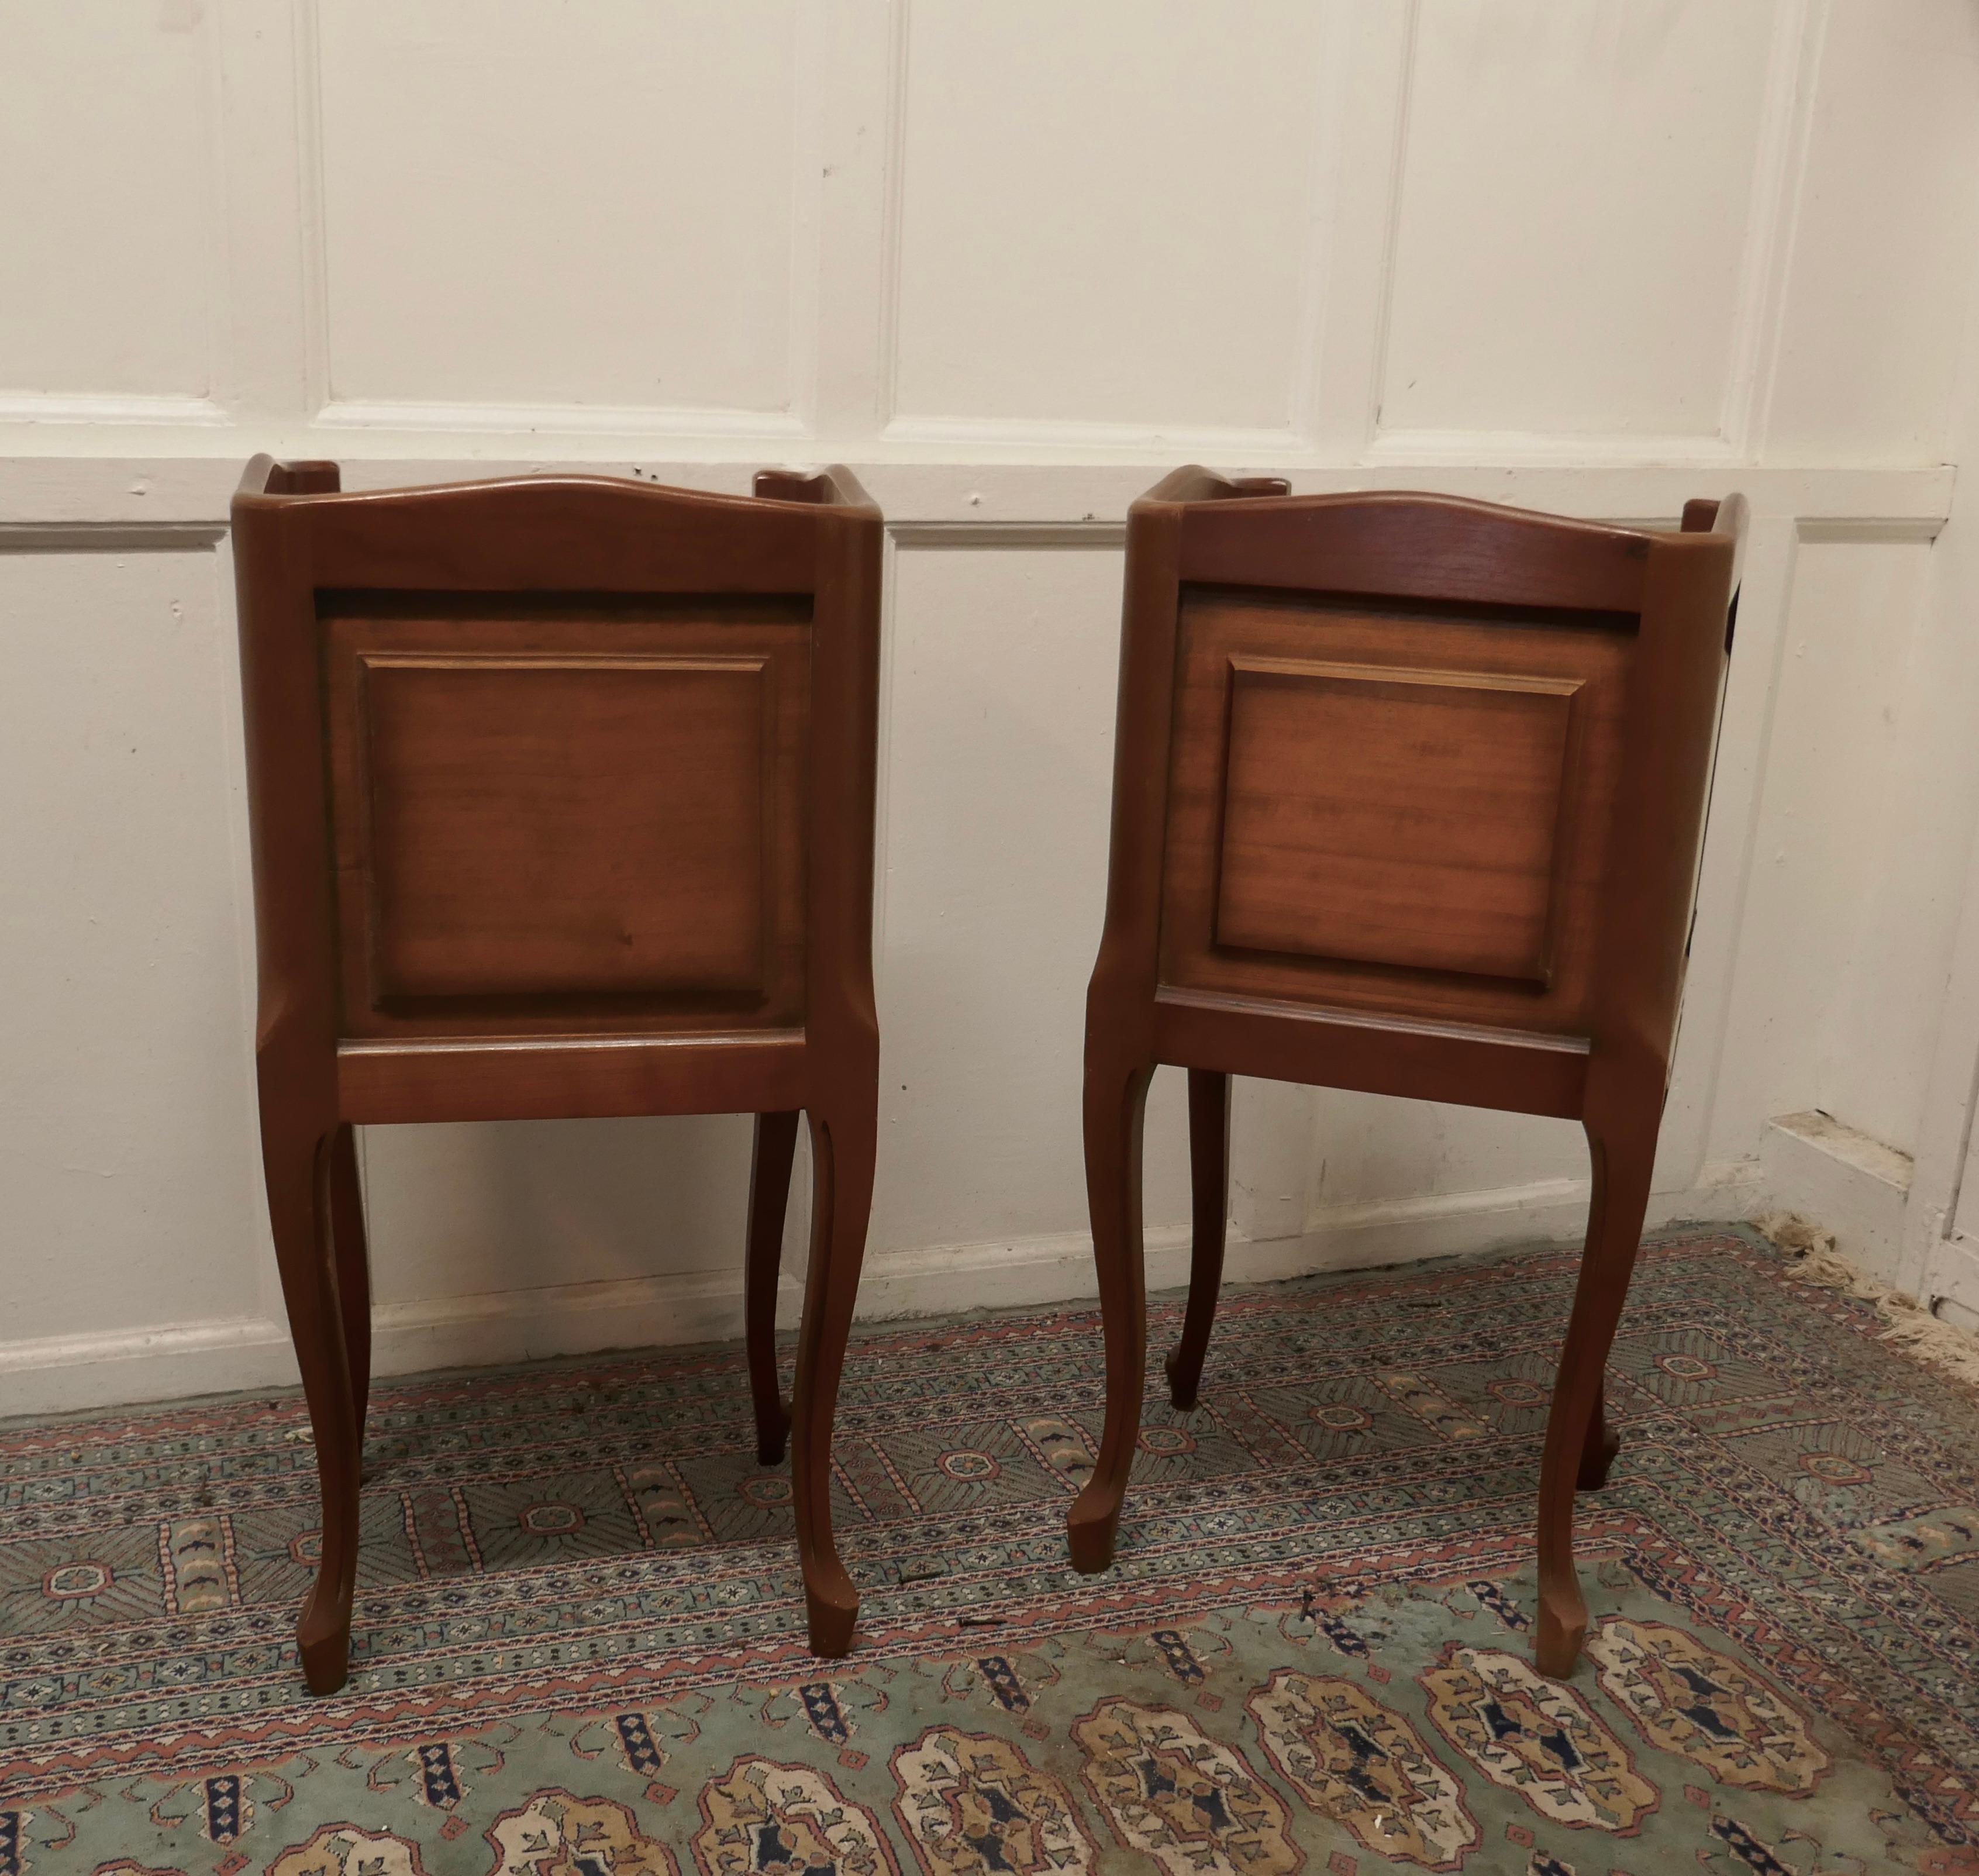 Pair of French Cherry Wood Bedside Cabinets or Cupboards 1